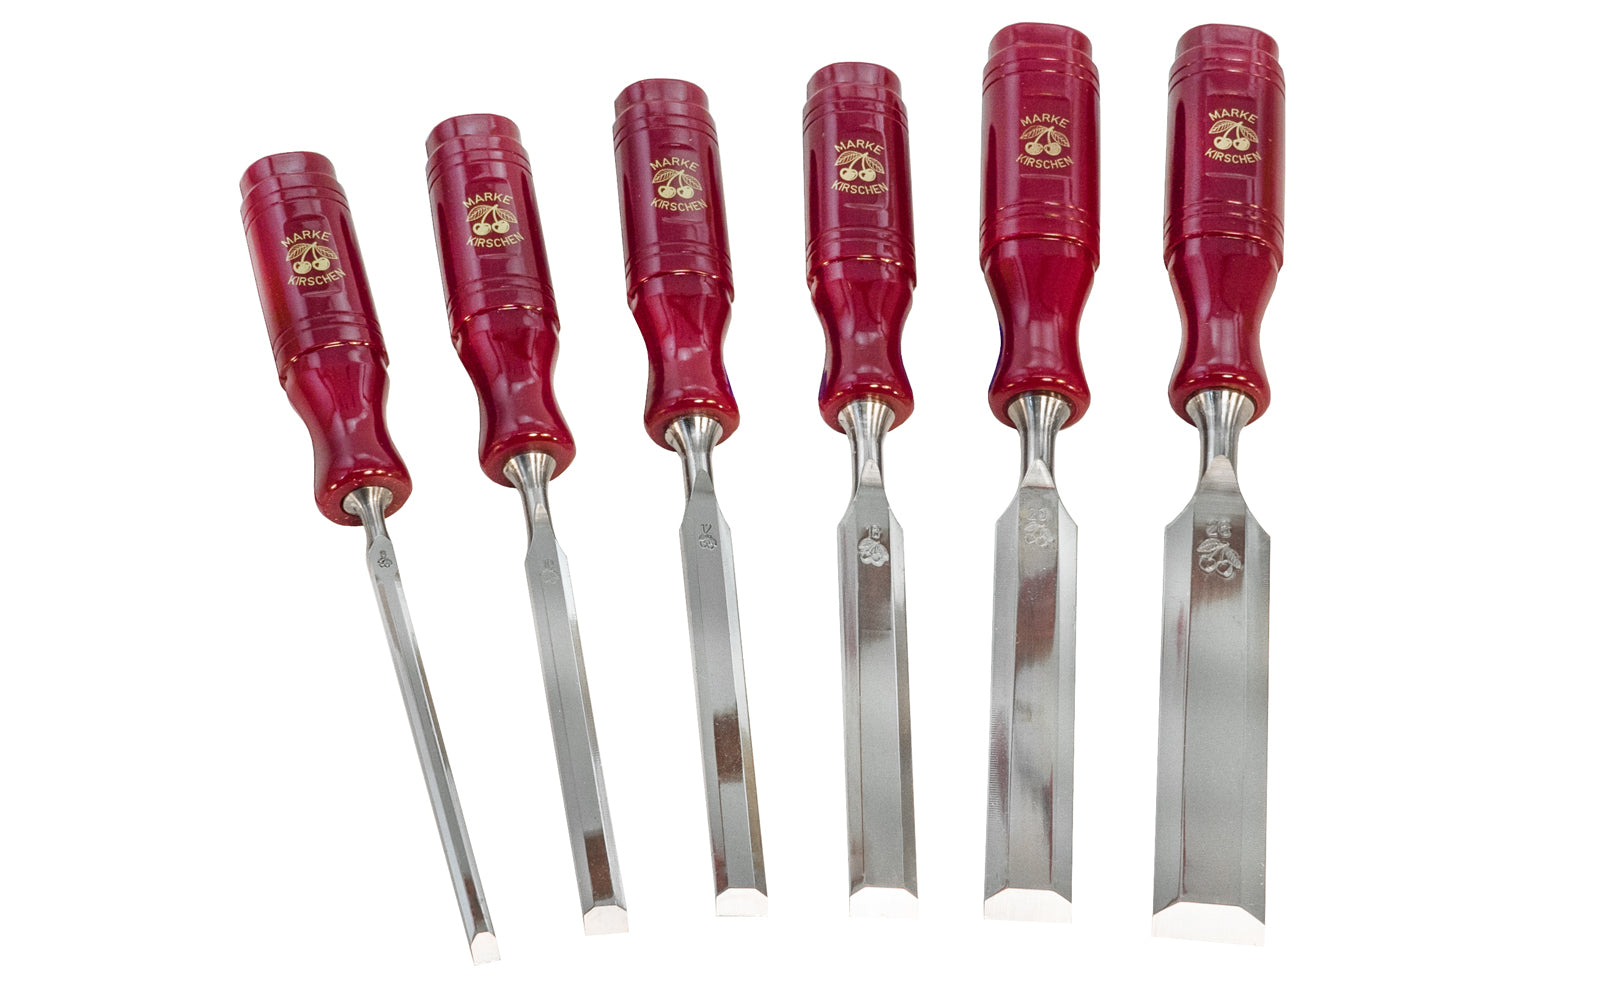 Two Cherries 6-Piece Firmer Chisel Set - 6, 10, 12, 16, 20, 26 mm